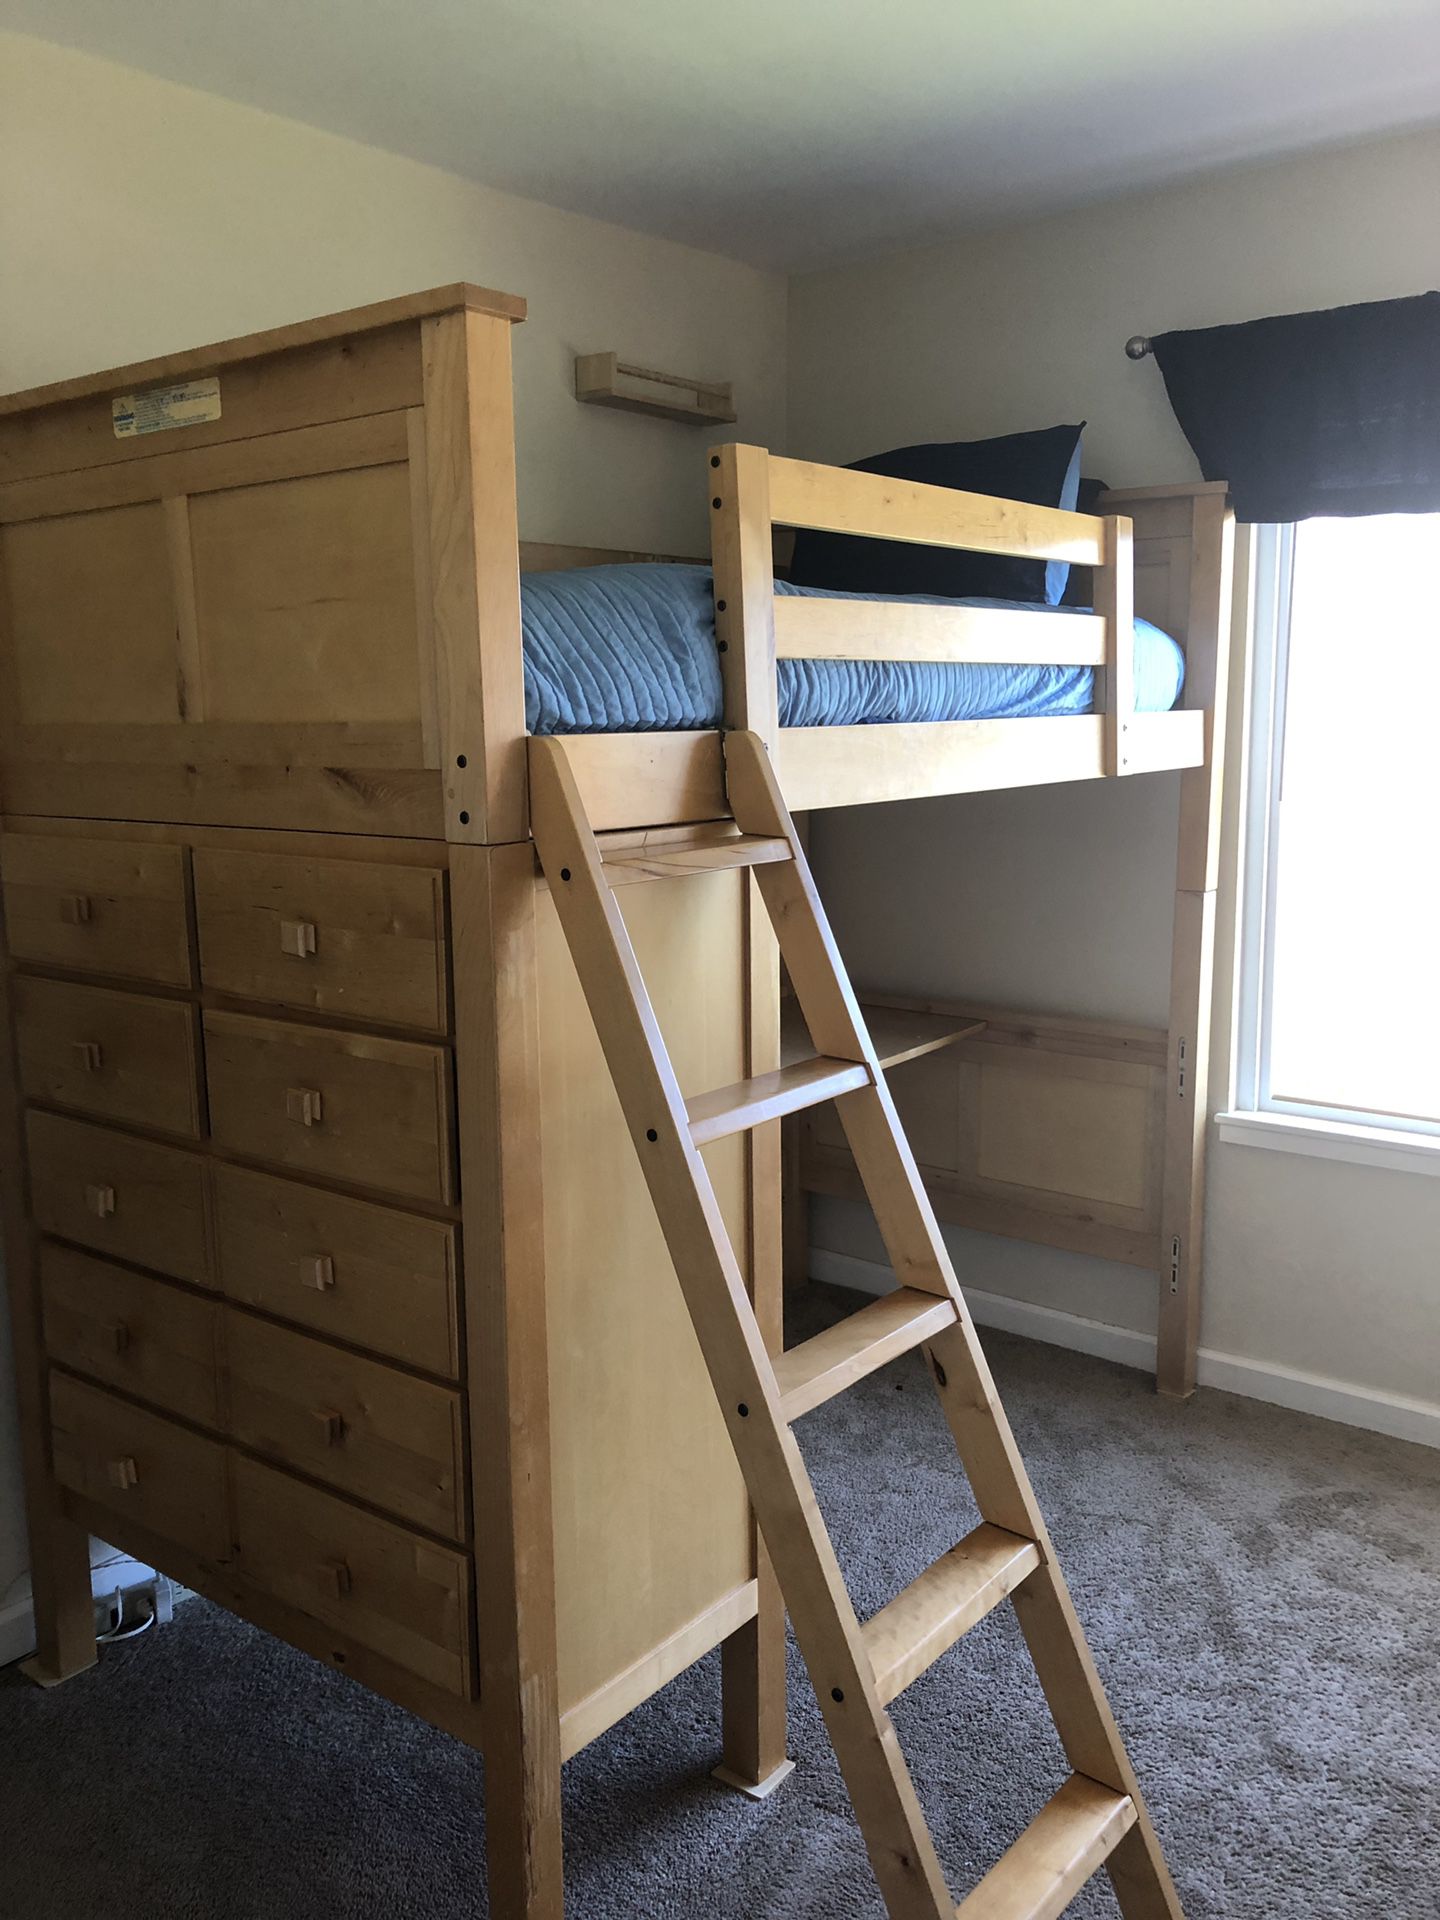 TWIN LOFT BED with Attached Dresser, Desk, Ladder, and Bulletin Boards